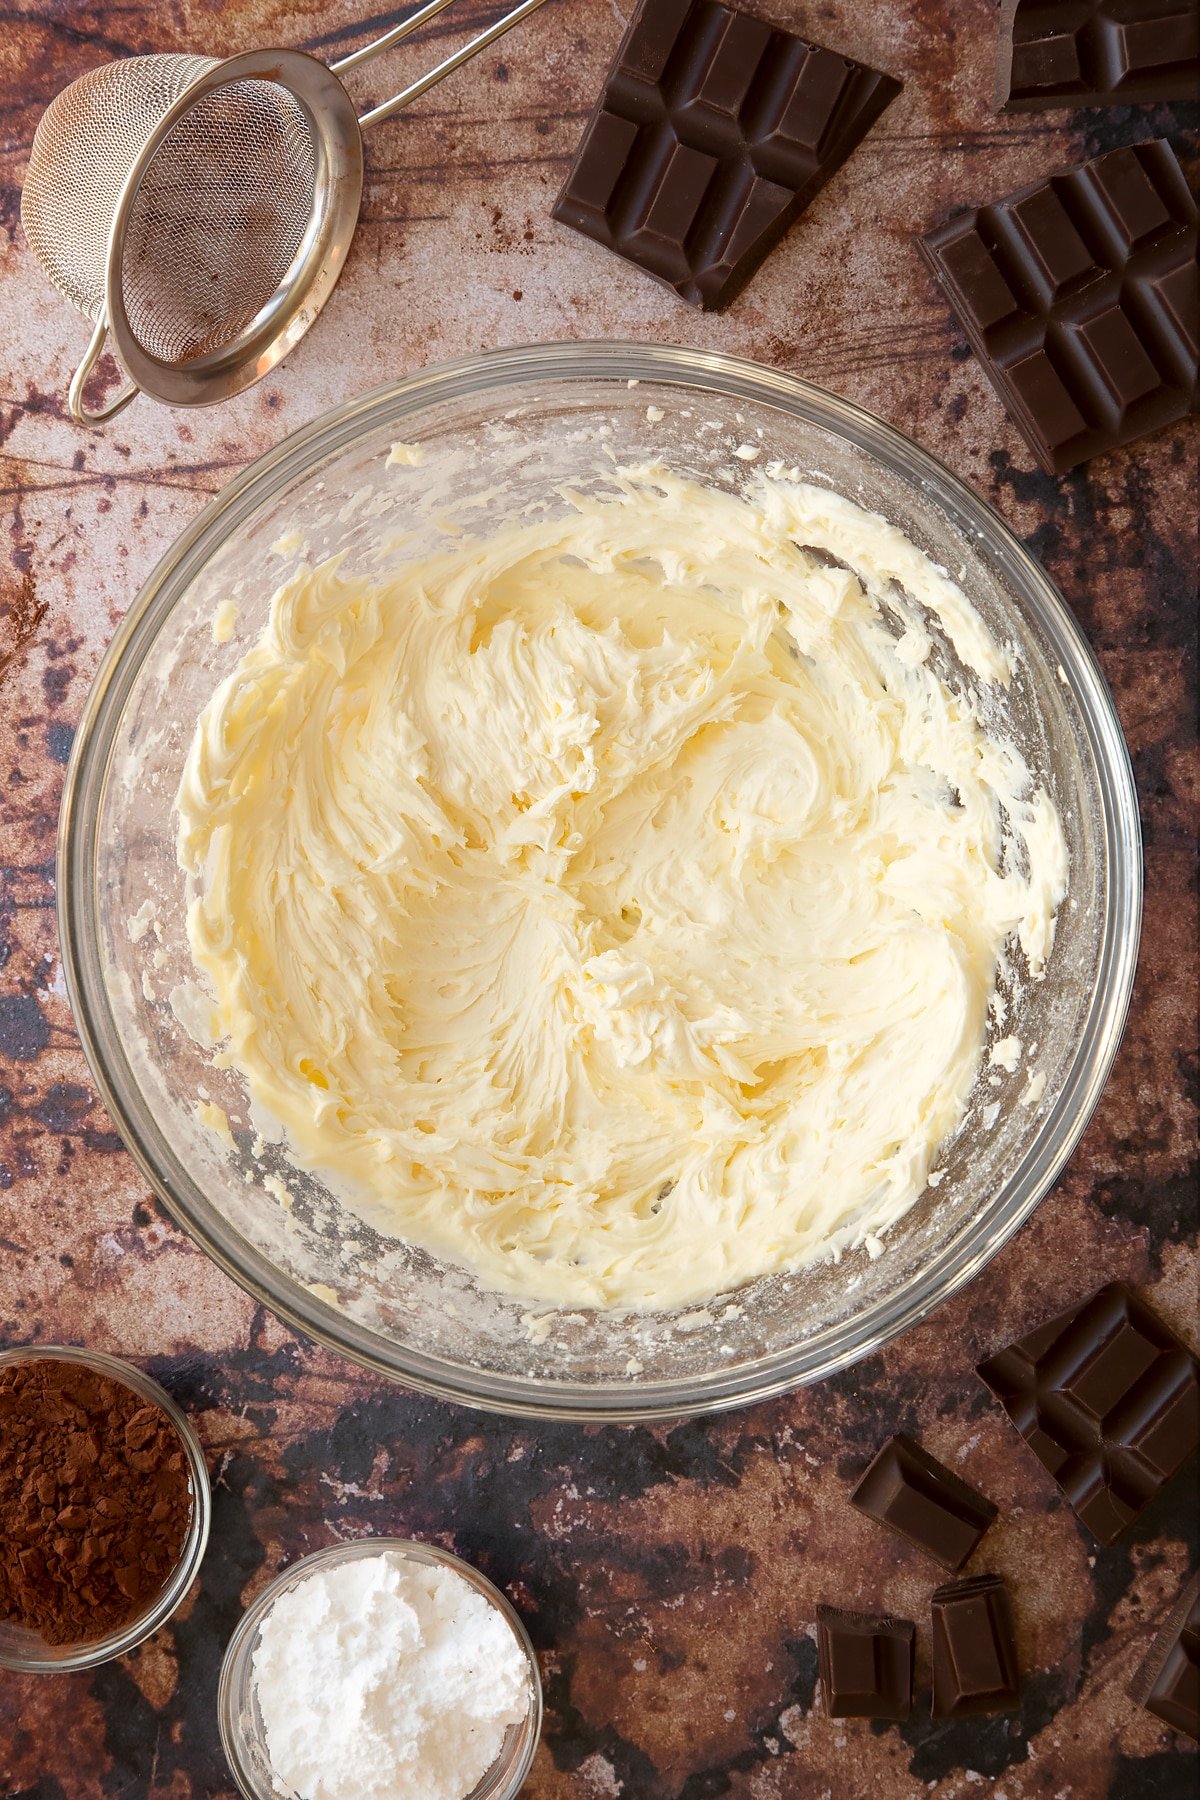 Vanilla buttercream in a bowl. Ingredients to make chocolate Swiss roll surround the bowl.